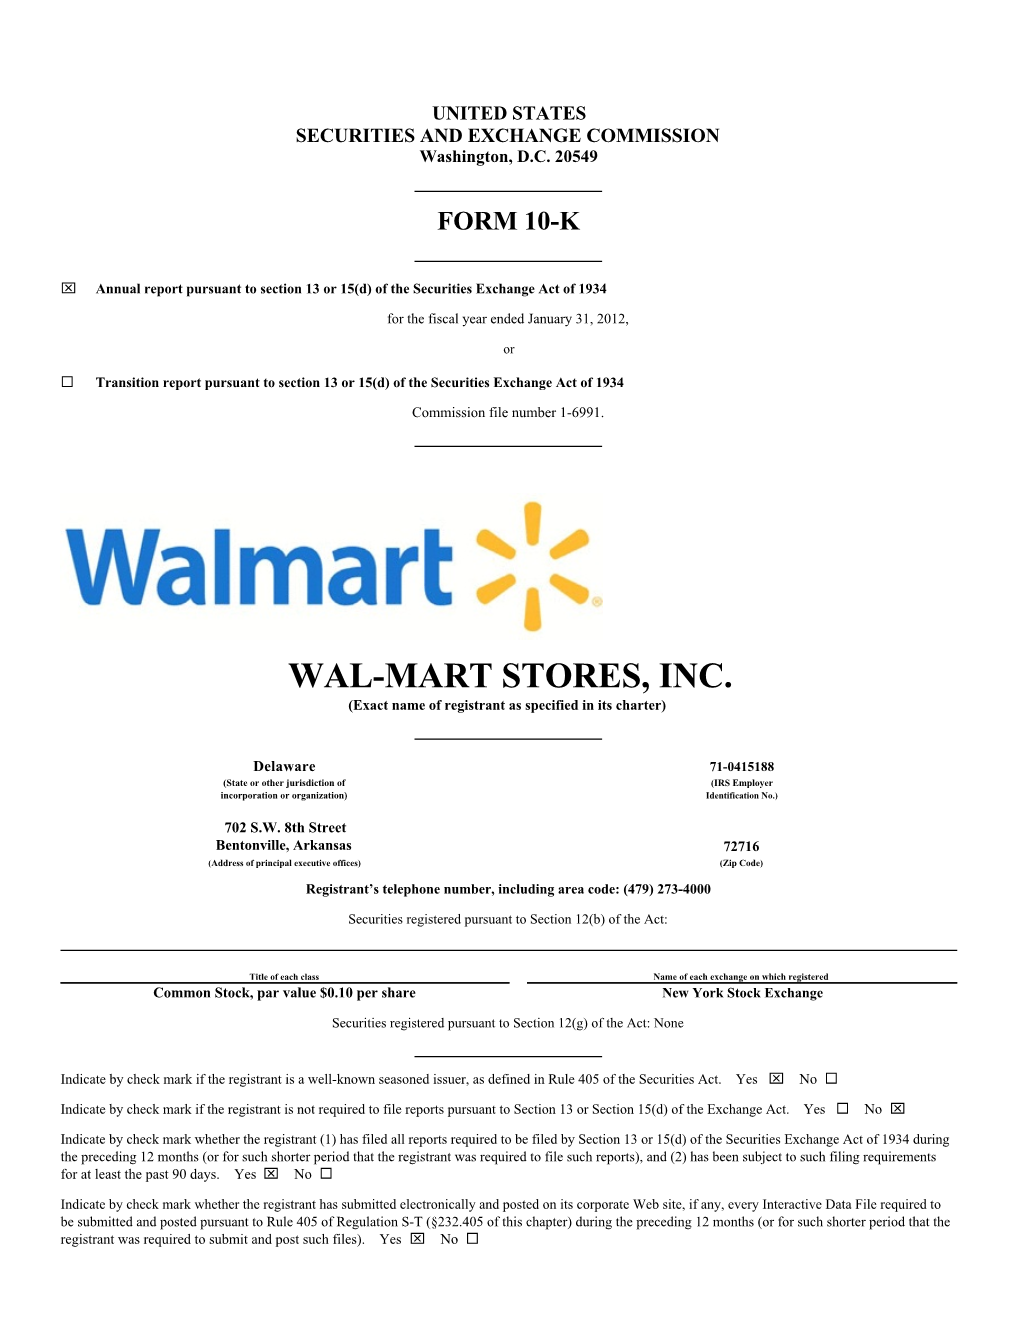 WAL-MART STORES, INC. (Exact Name of Registrant As Specified in Its Charter)